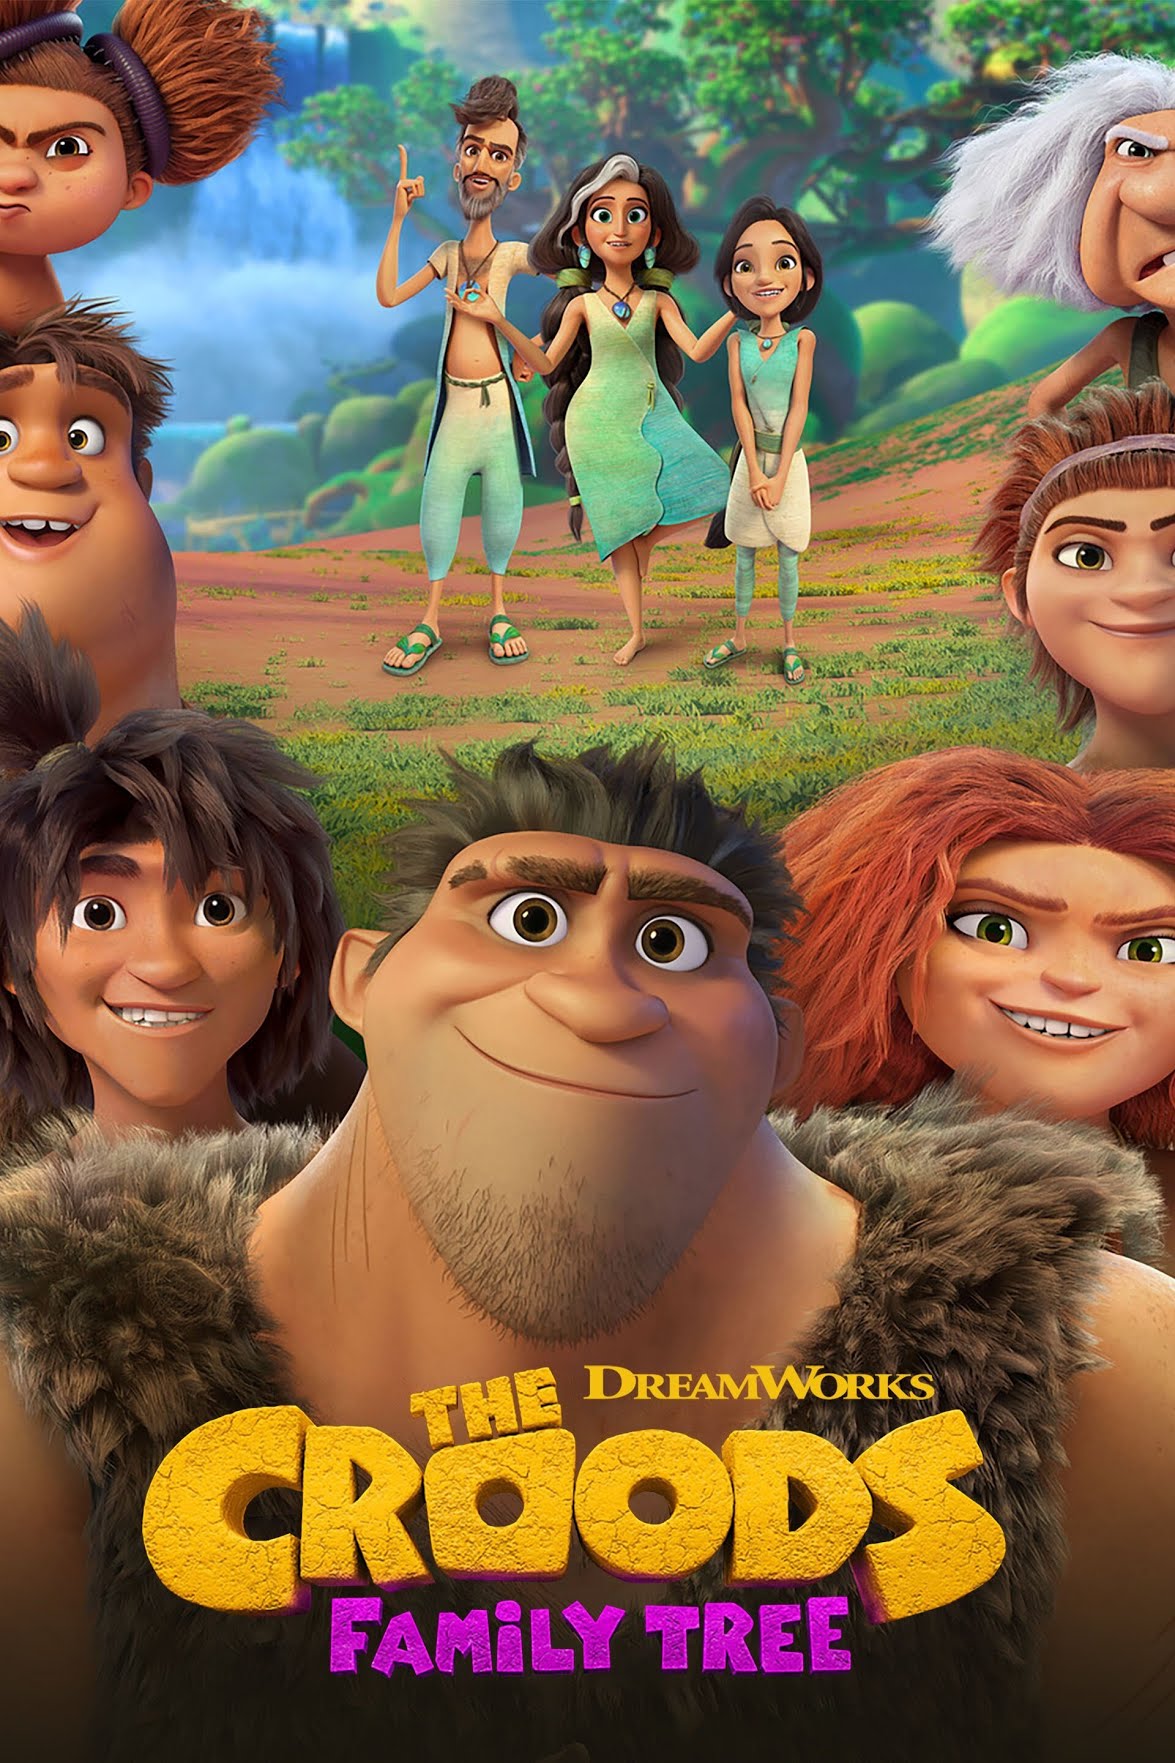 The Croods Family Tree S01E02 1080p HULU WEB-DL DDP5 1 H 264-FLUX NLsubs cusom